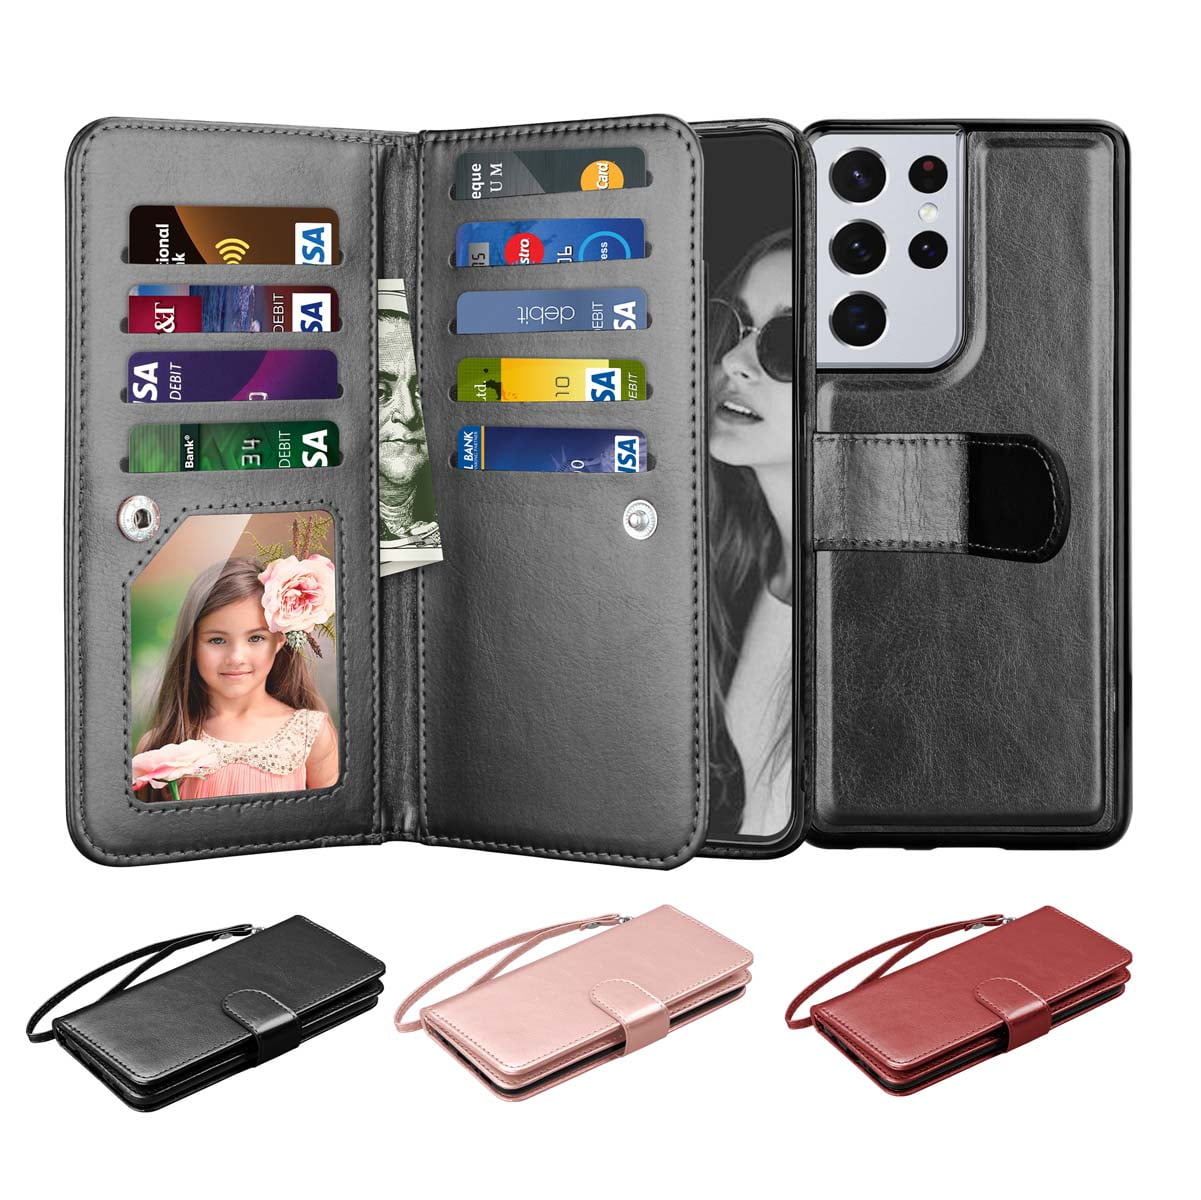 Detachable Samsung Galaxy Wallet Case Handmade Wallet Case Personalized Wallet Case Handmade Case Gift for Him Gift For Her